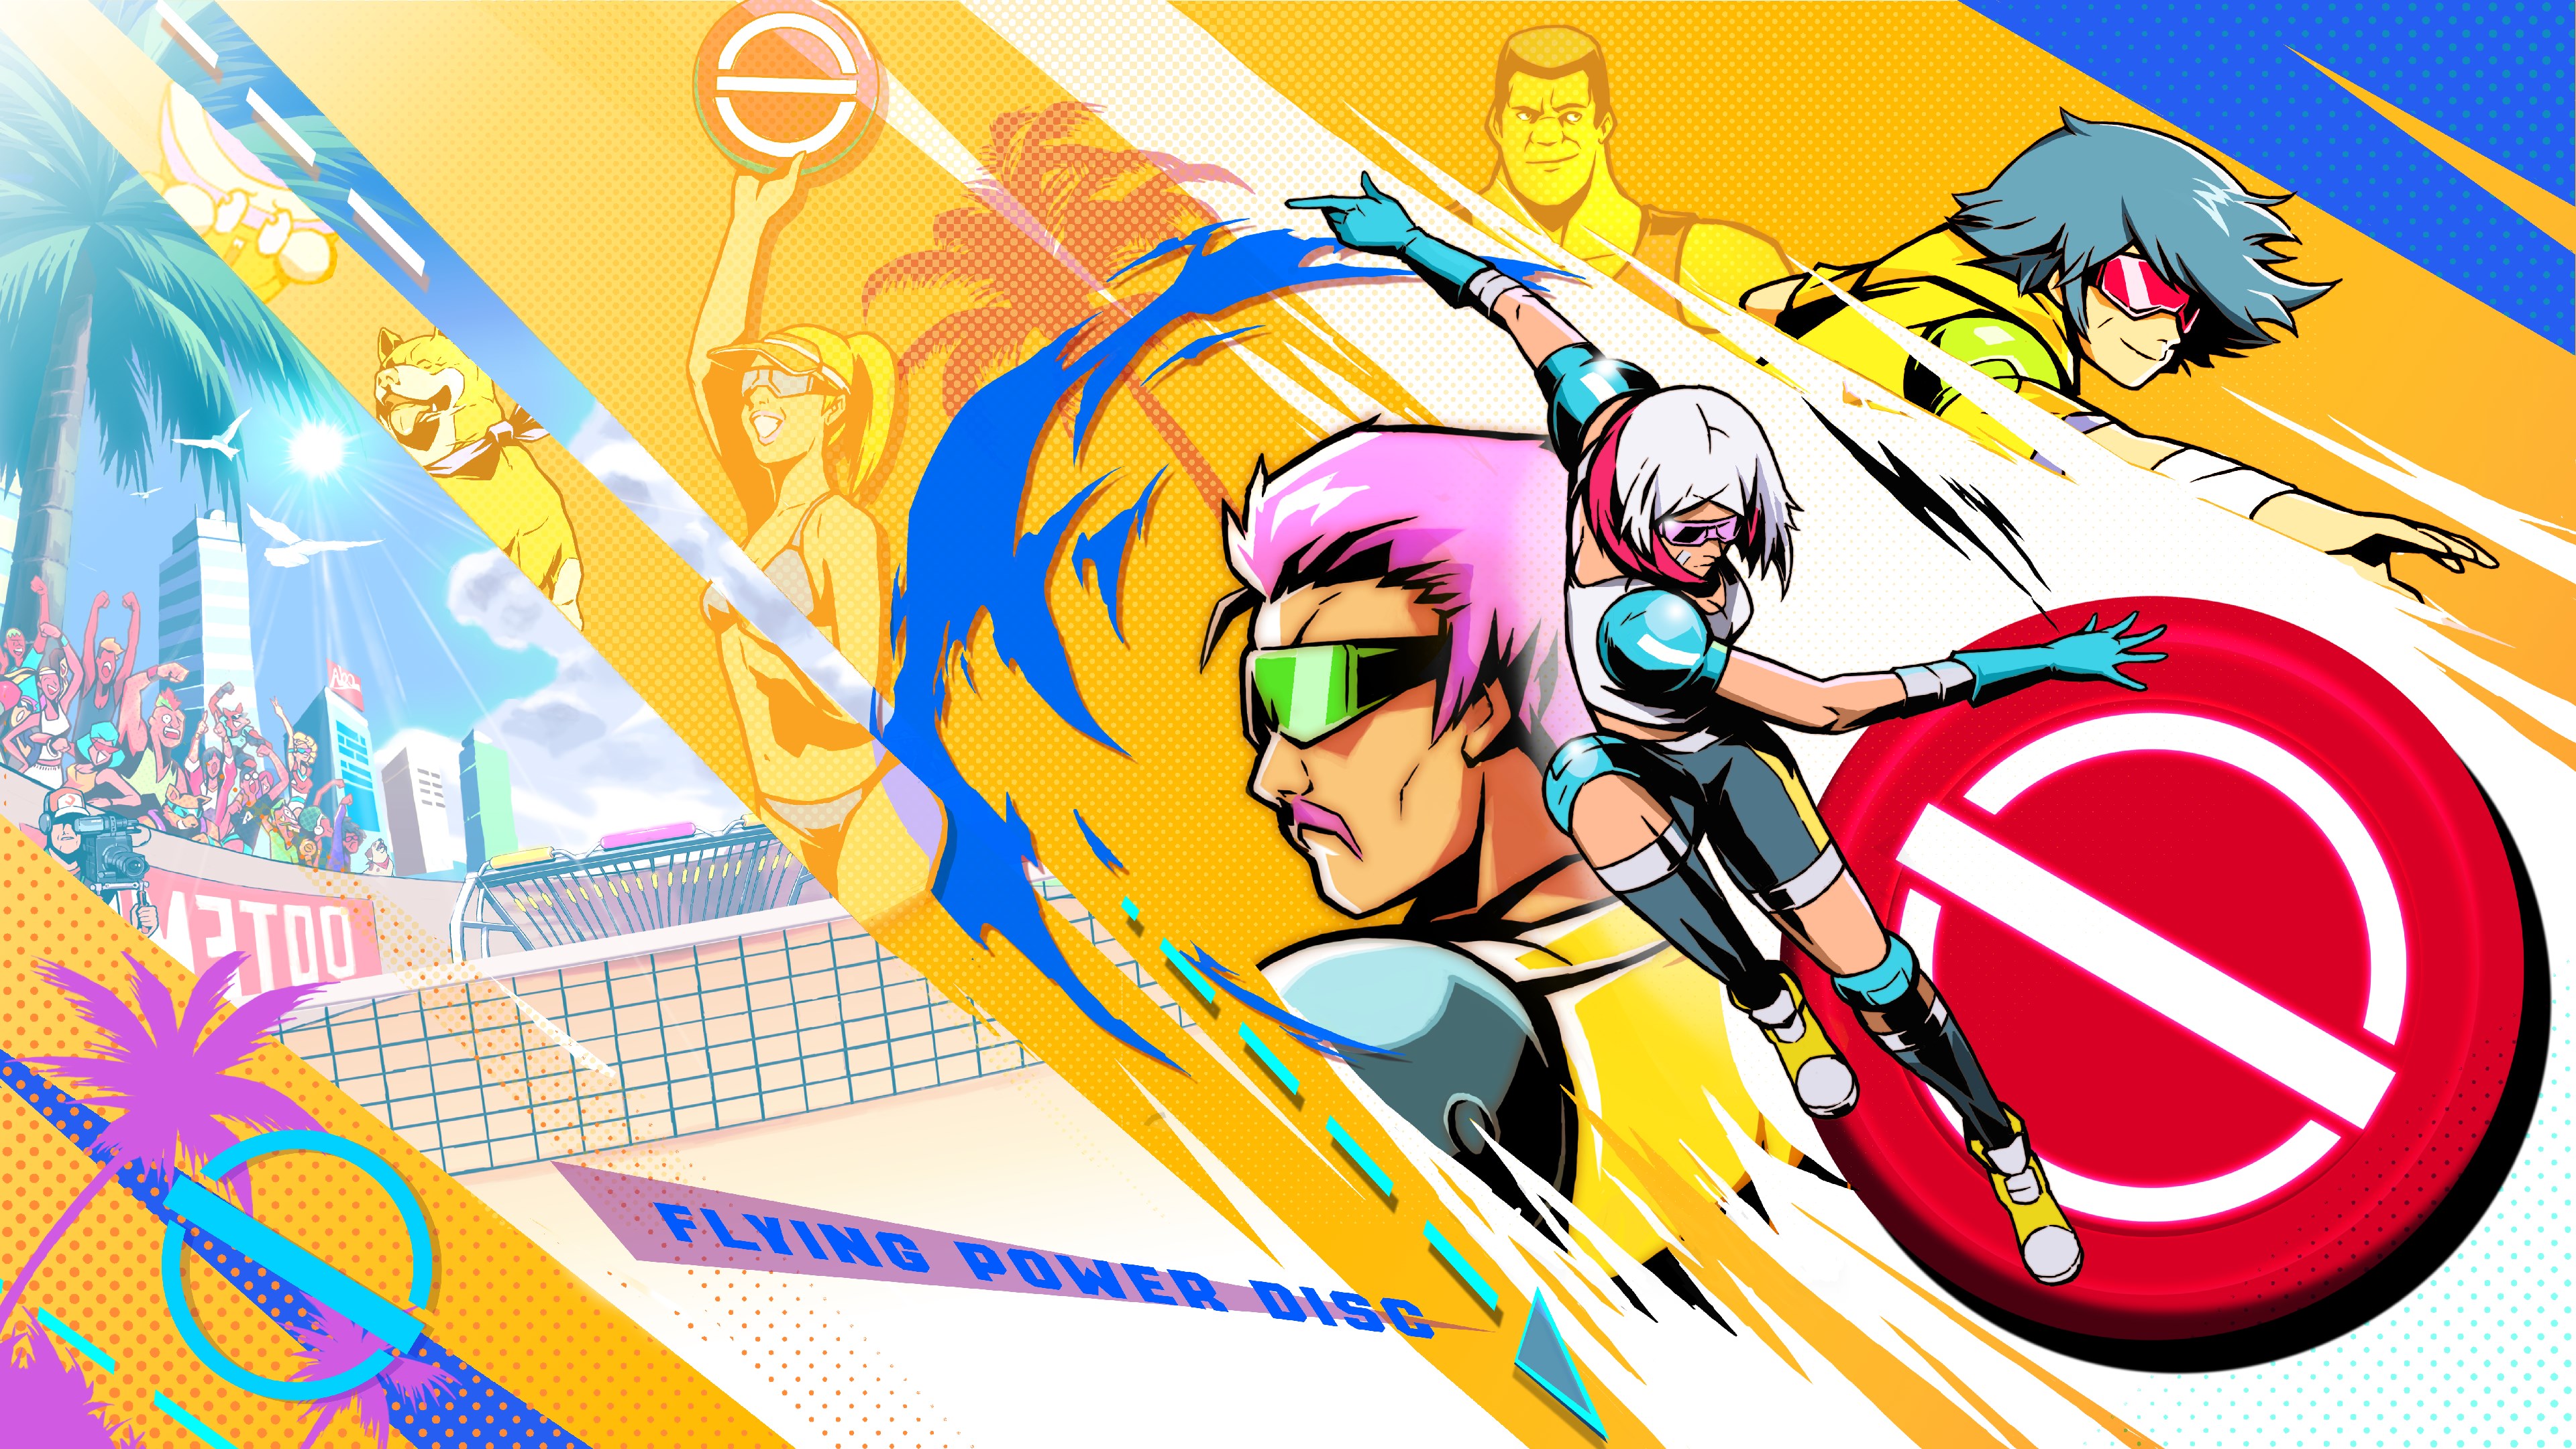 Windjammers 2 Is Now Available For PC, Xbox One, And Xbox Series X|S
(Game Pass)